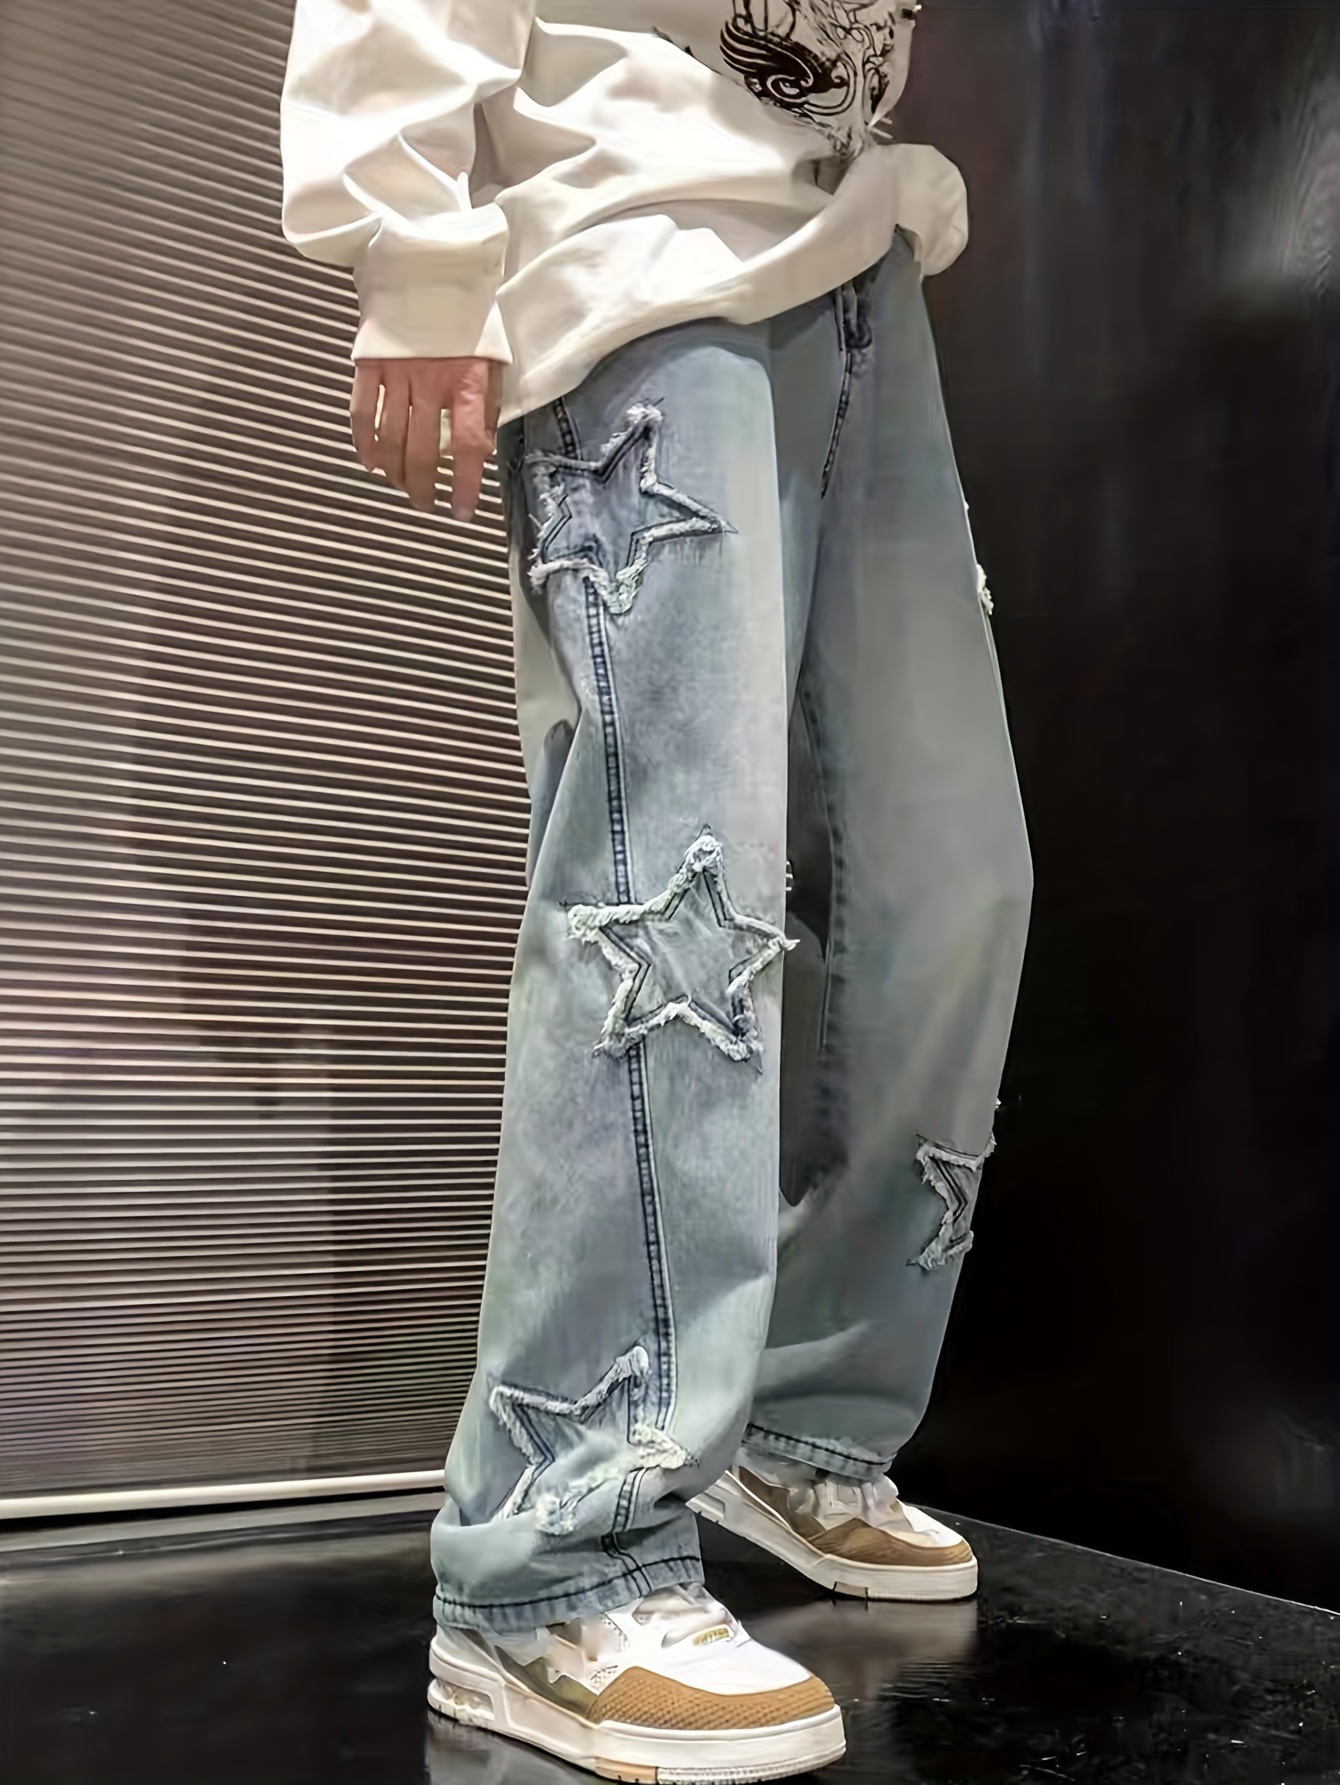 Y2K Five-Pointed Star Jeans Vintage Men's Loose Streetwear Hip Hop Zip  Patchwork Blue Straight Casual Jeans (Blue,S,Small) at  Men's  Clothing store